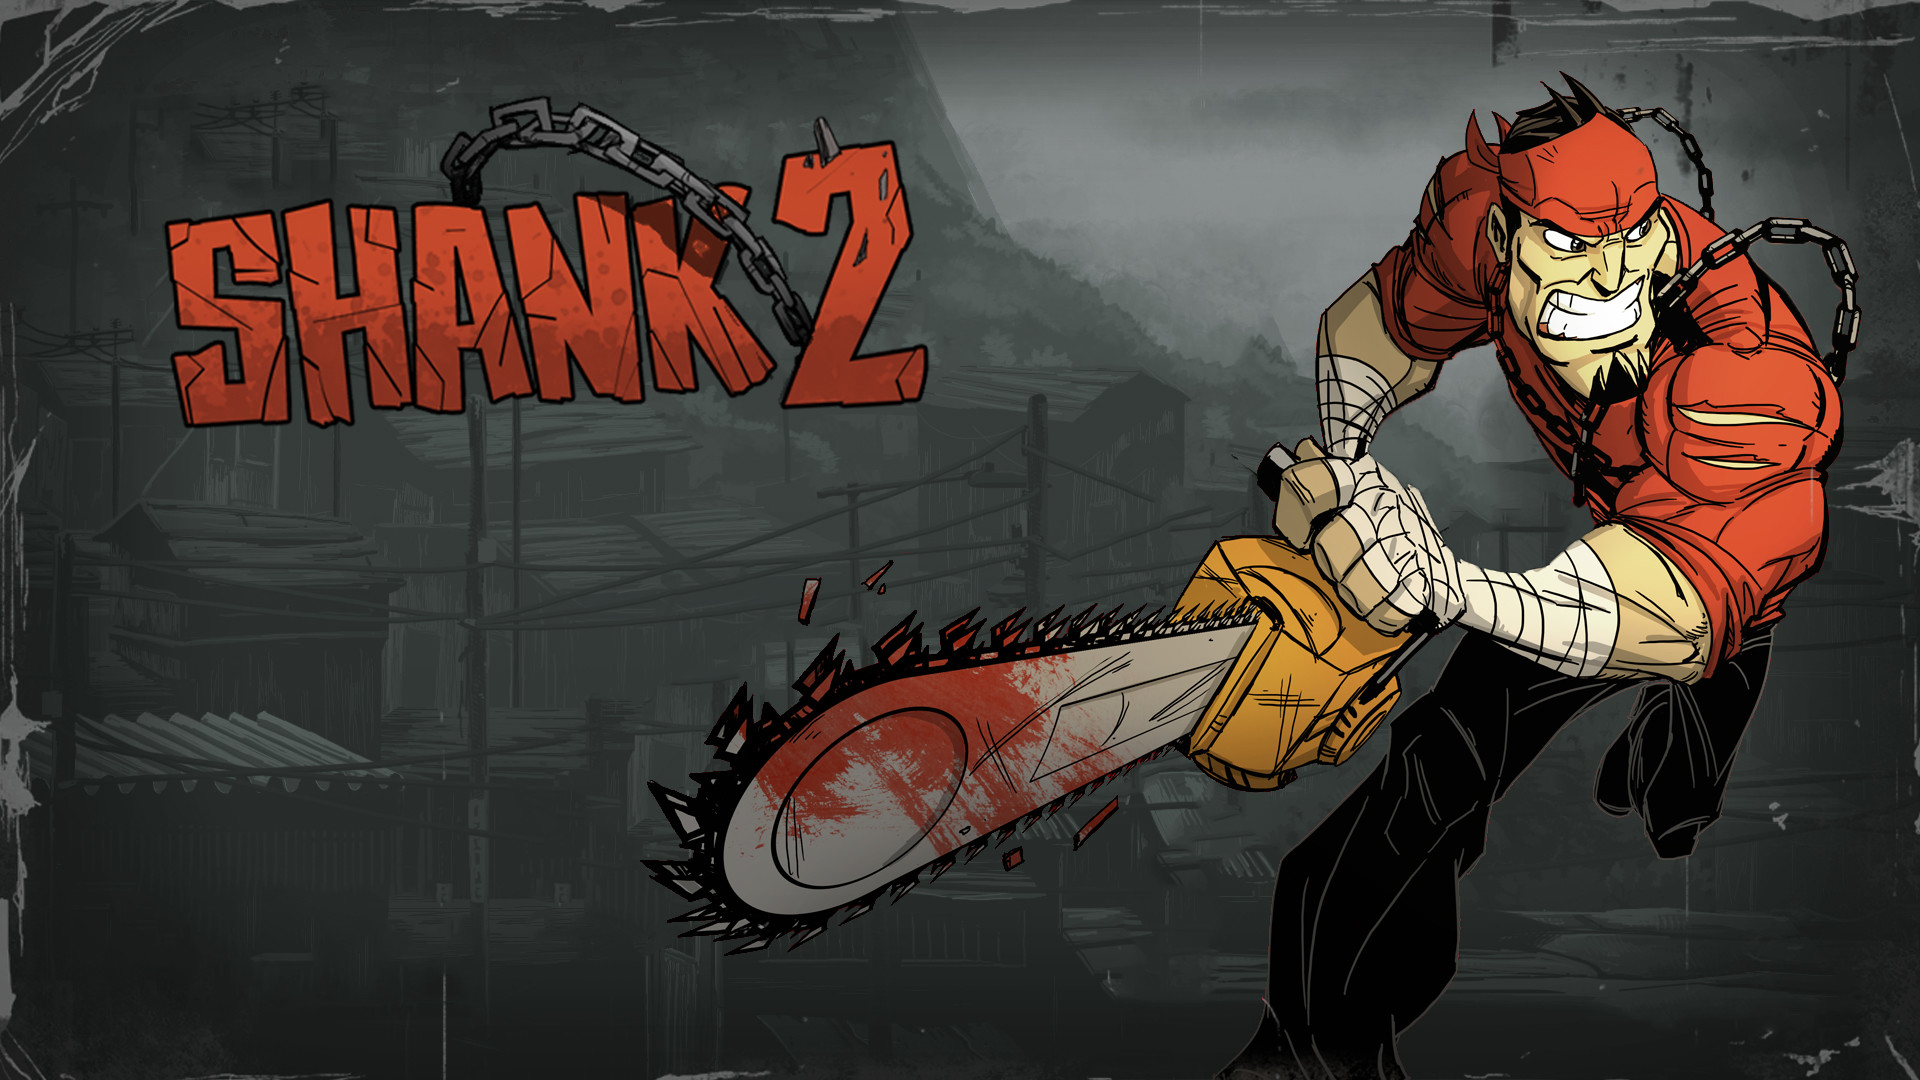 1920x1080 ... Shank 2 Wallpapers HD by CyWin